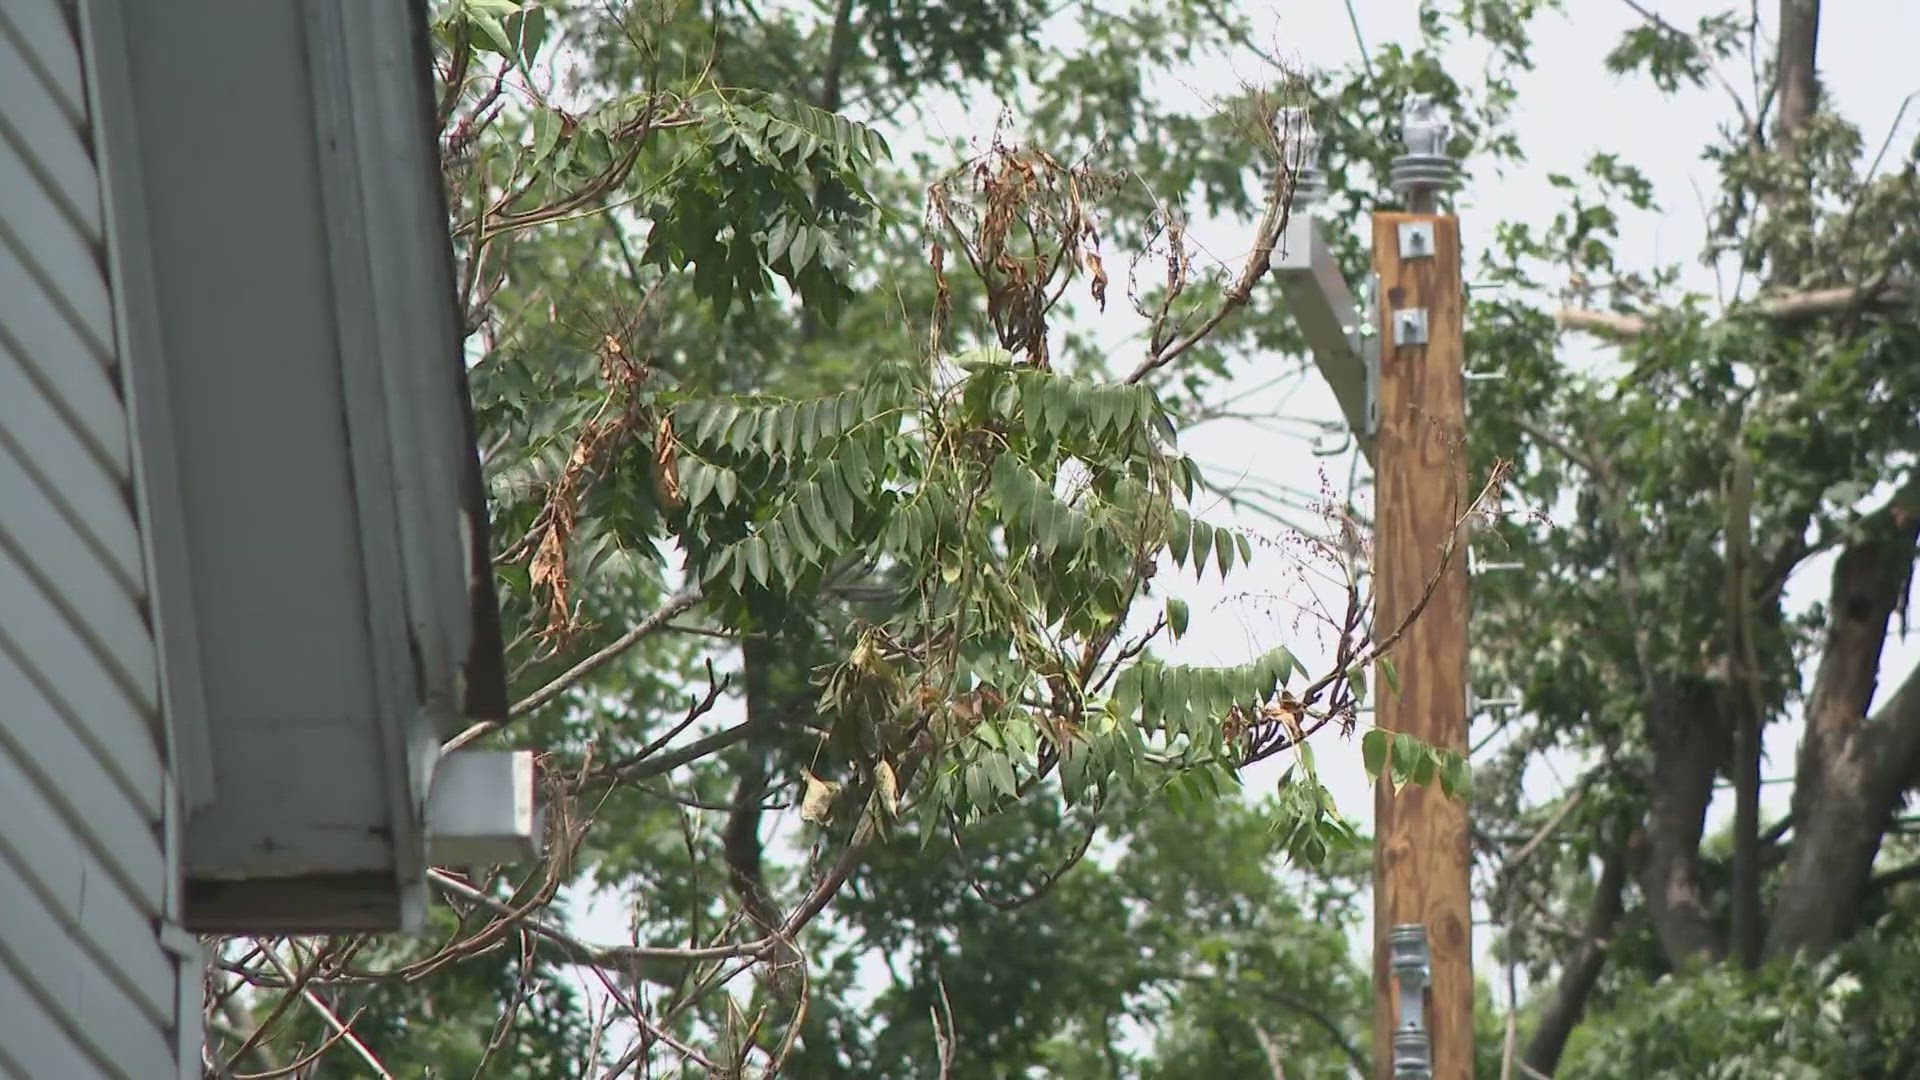 University City crews will begin collecting tree limbs and debris Monday. Residents are asked to move the debris on their property to the curb.